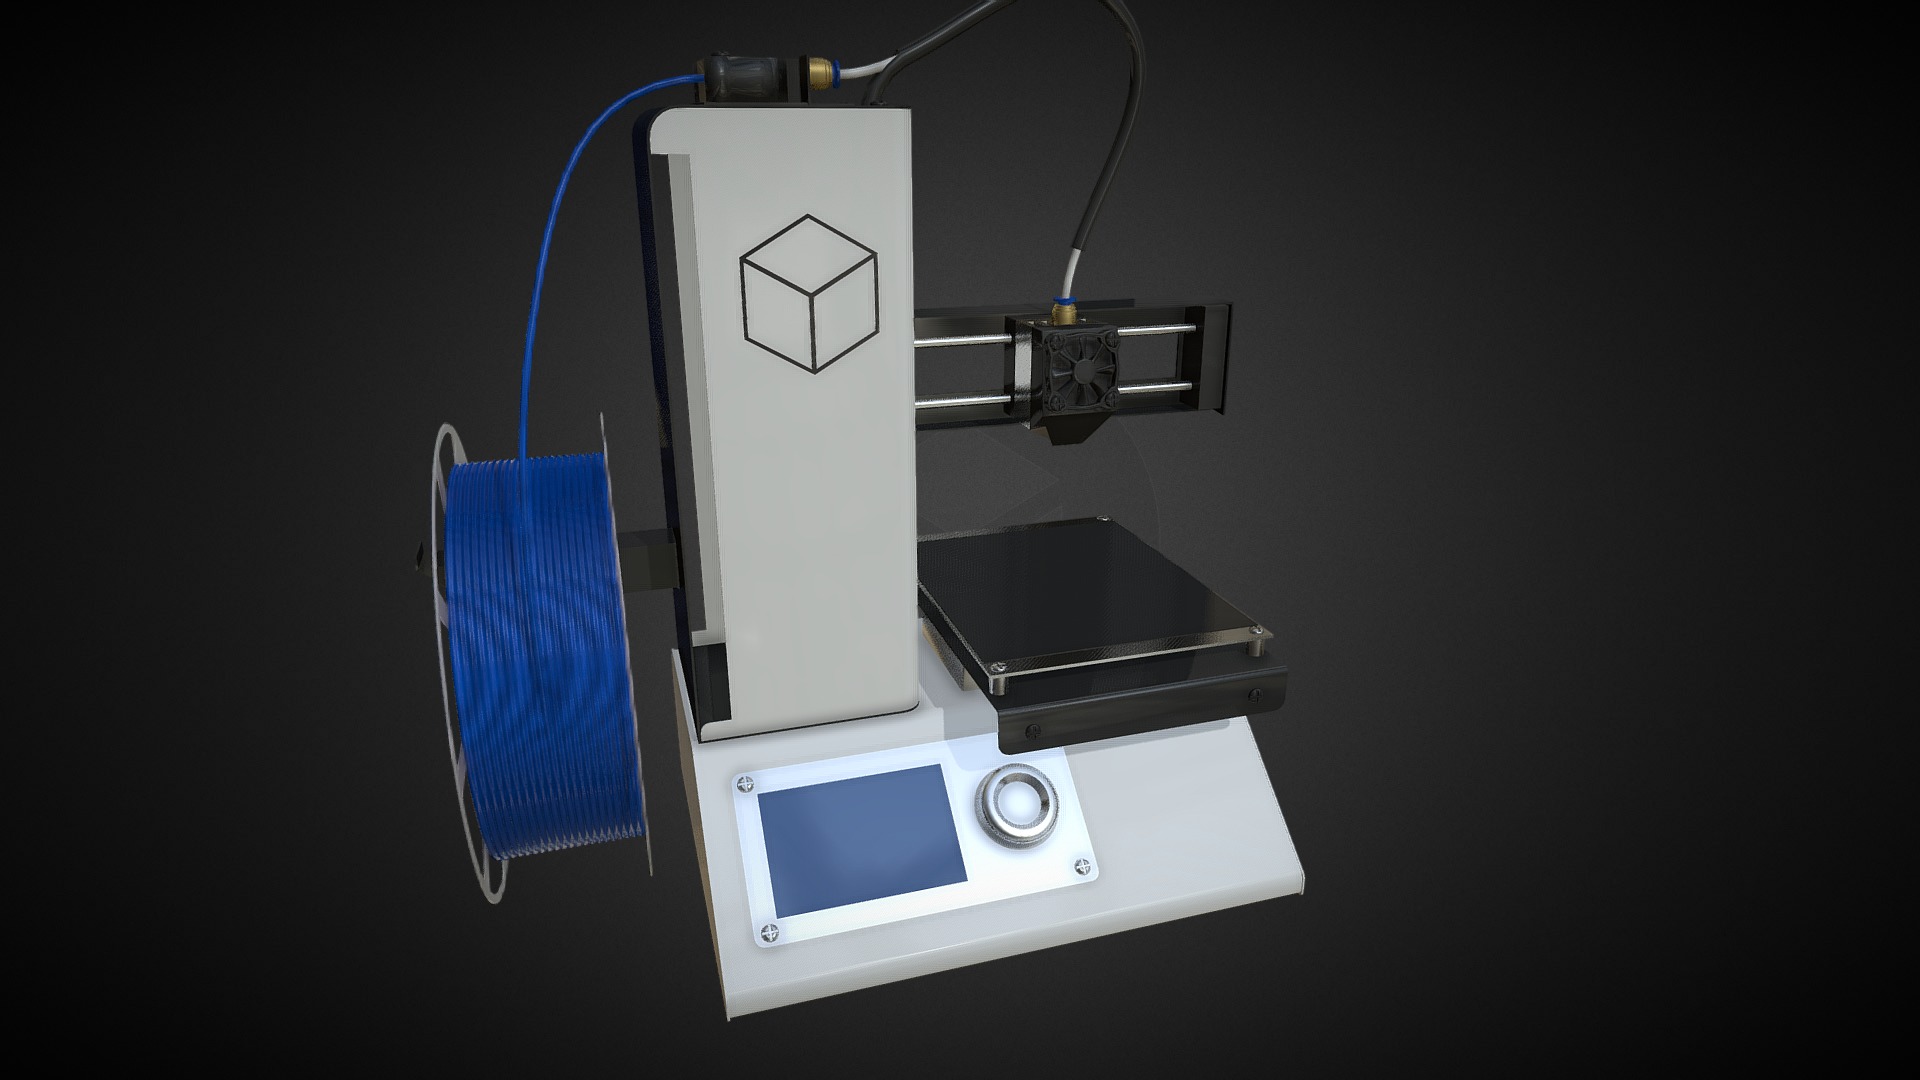 3D model 3D Printer Model based on Malyan M200 - This is a 3D model of the 3D Printer Model based on Malyan M200. The 3D model is about a white device with blue wires.